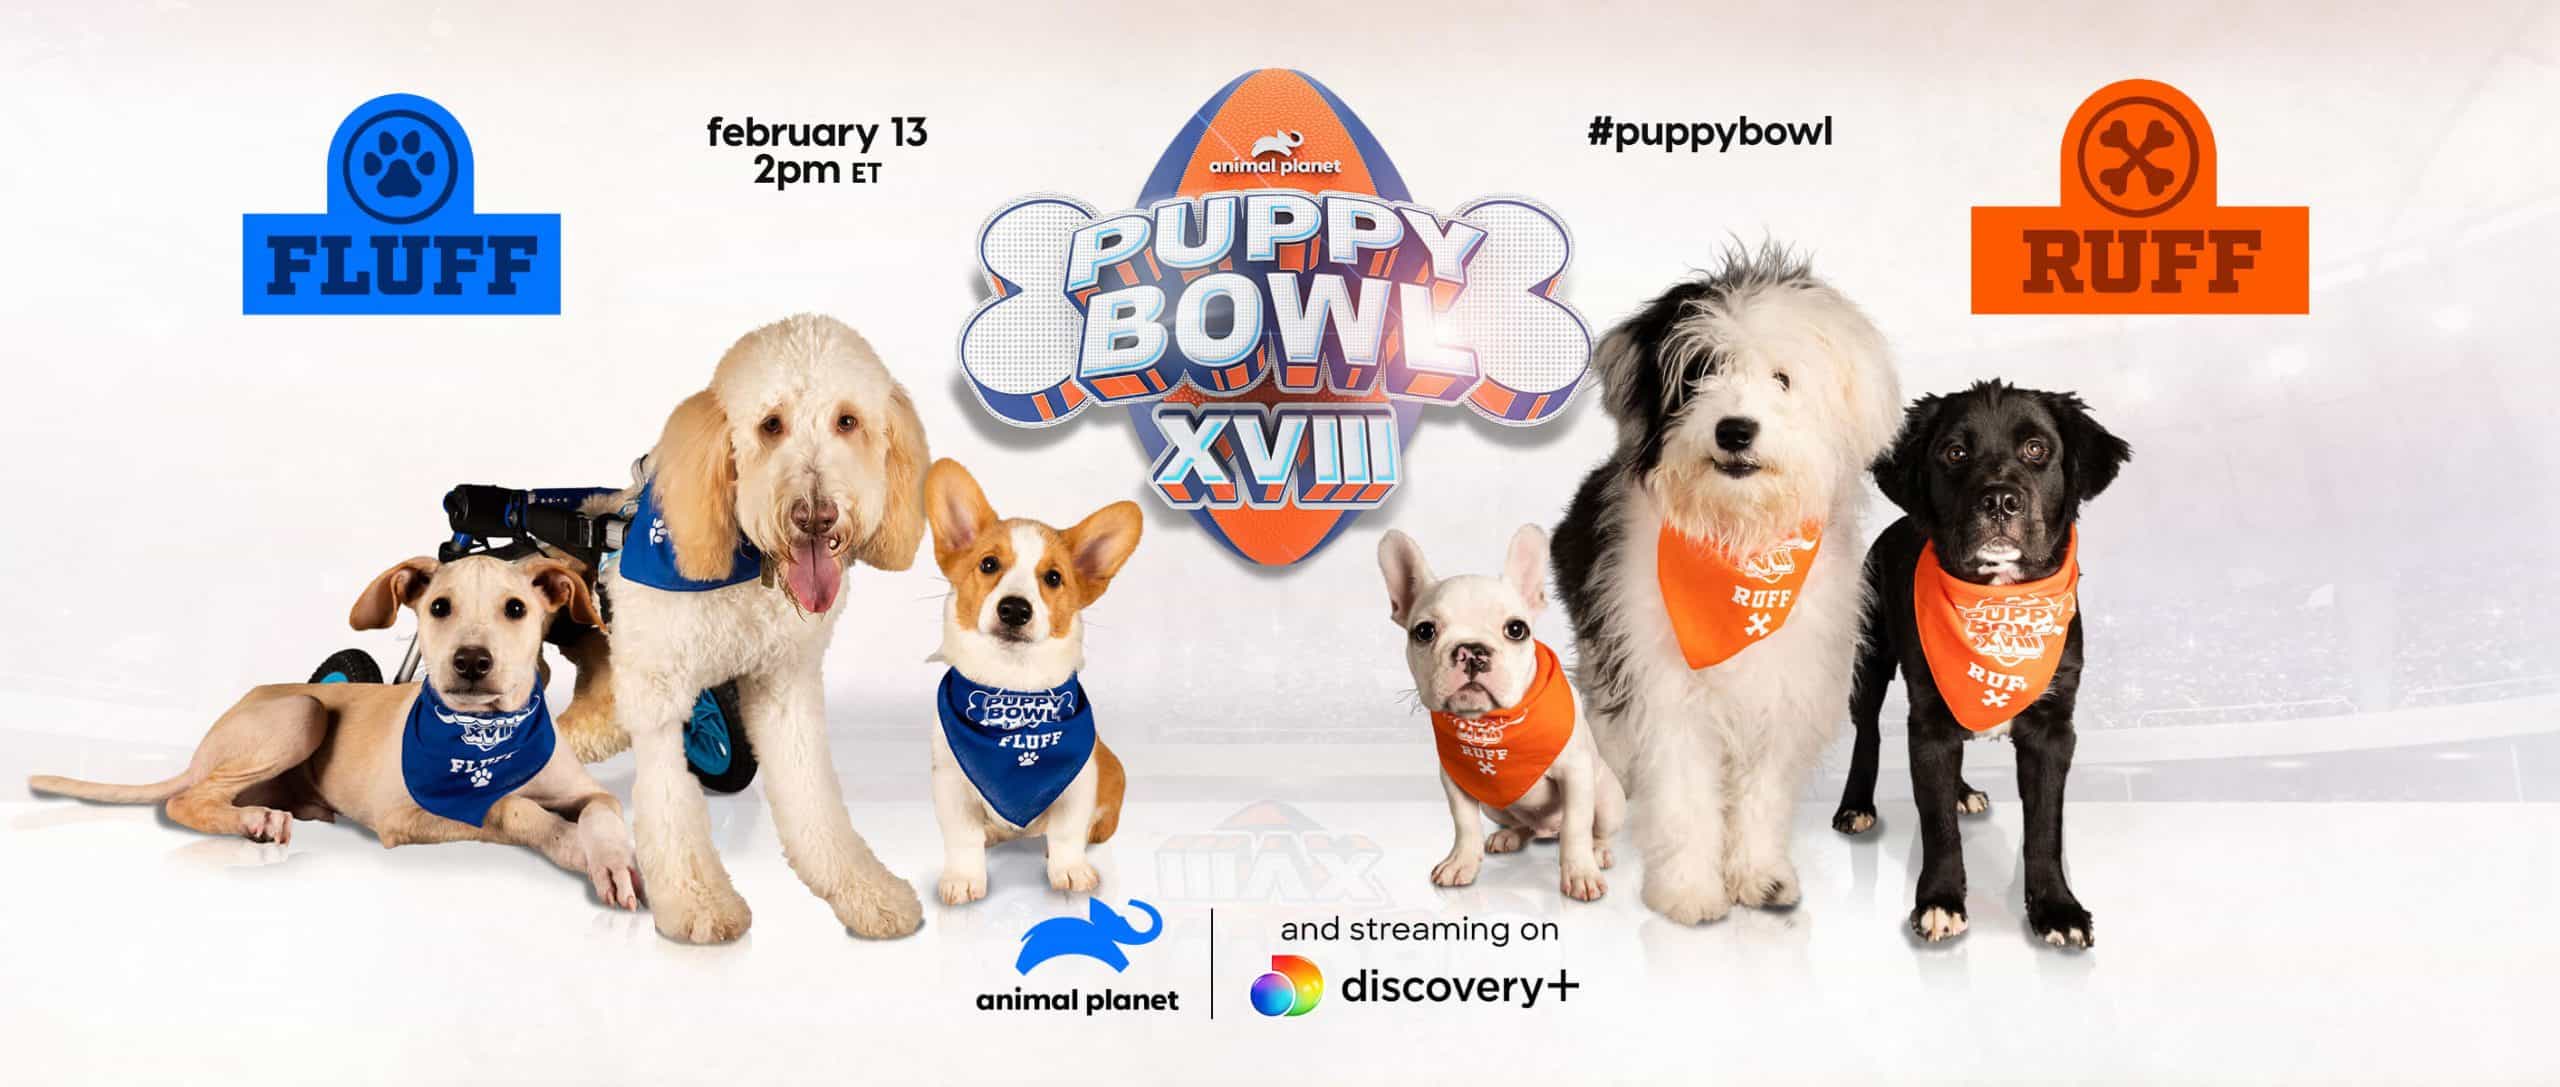 How to Watch the Puppy Bowl 2023 